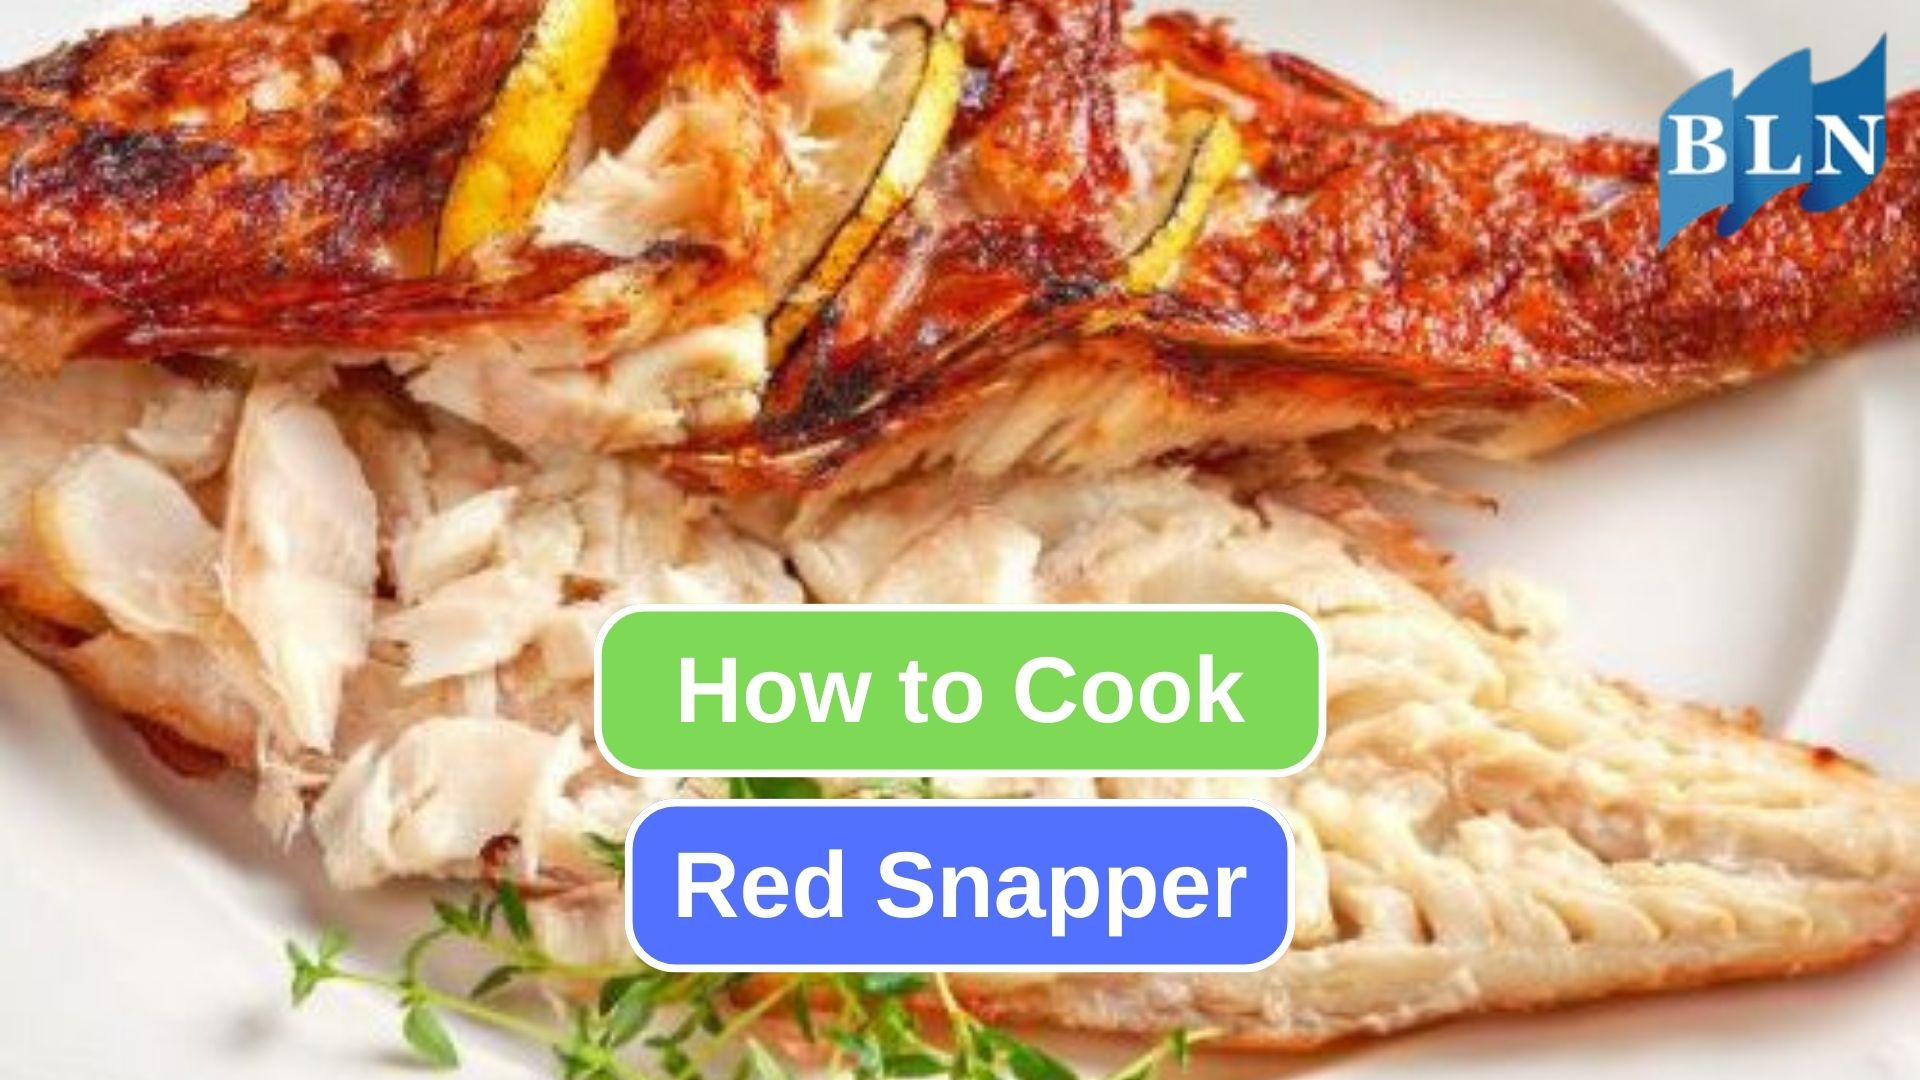 Here's What To Do with Red Snapper in Your Kitchen